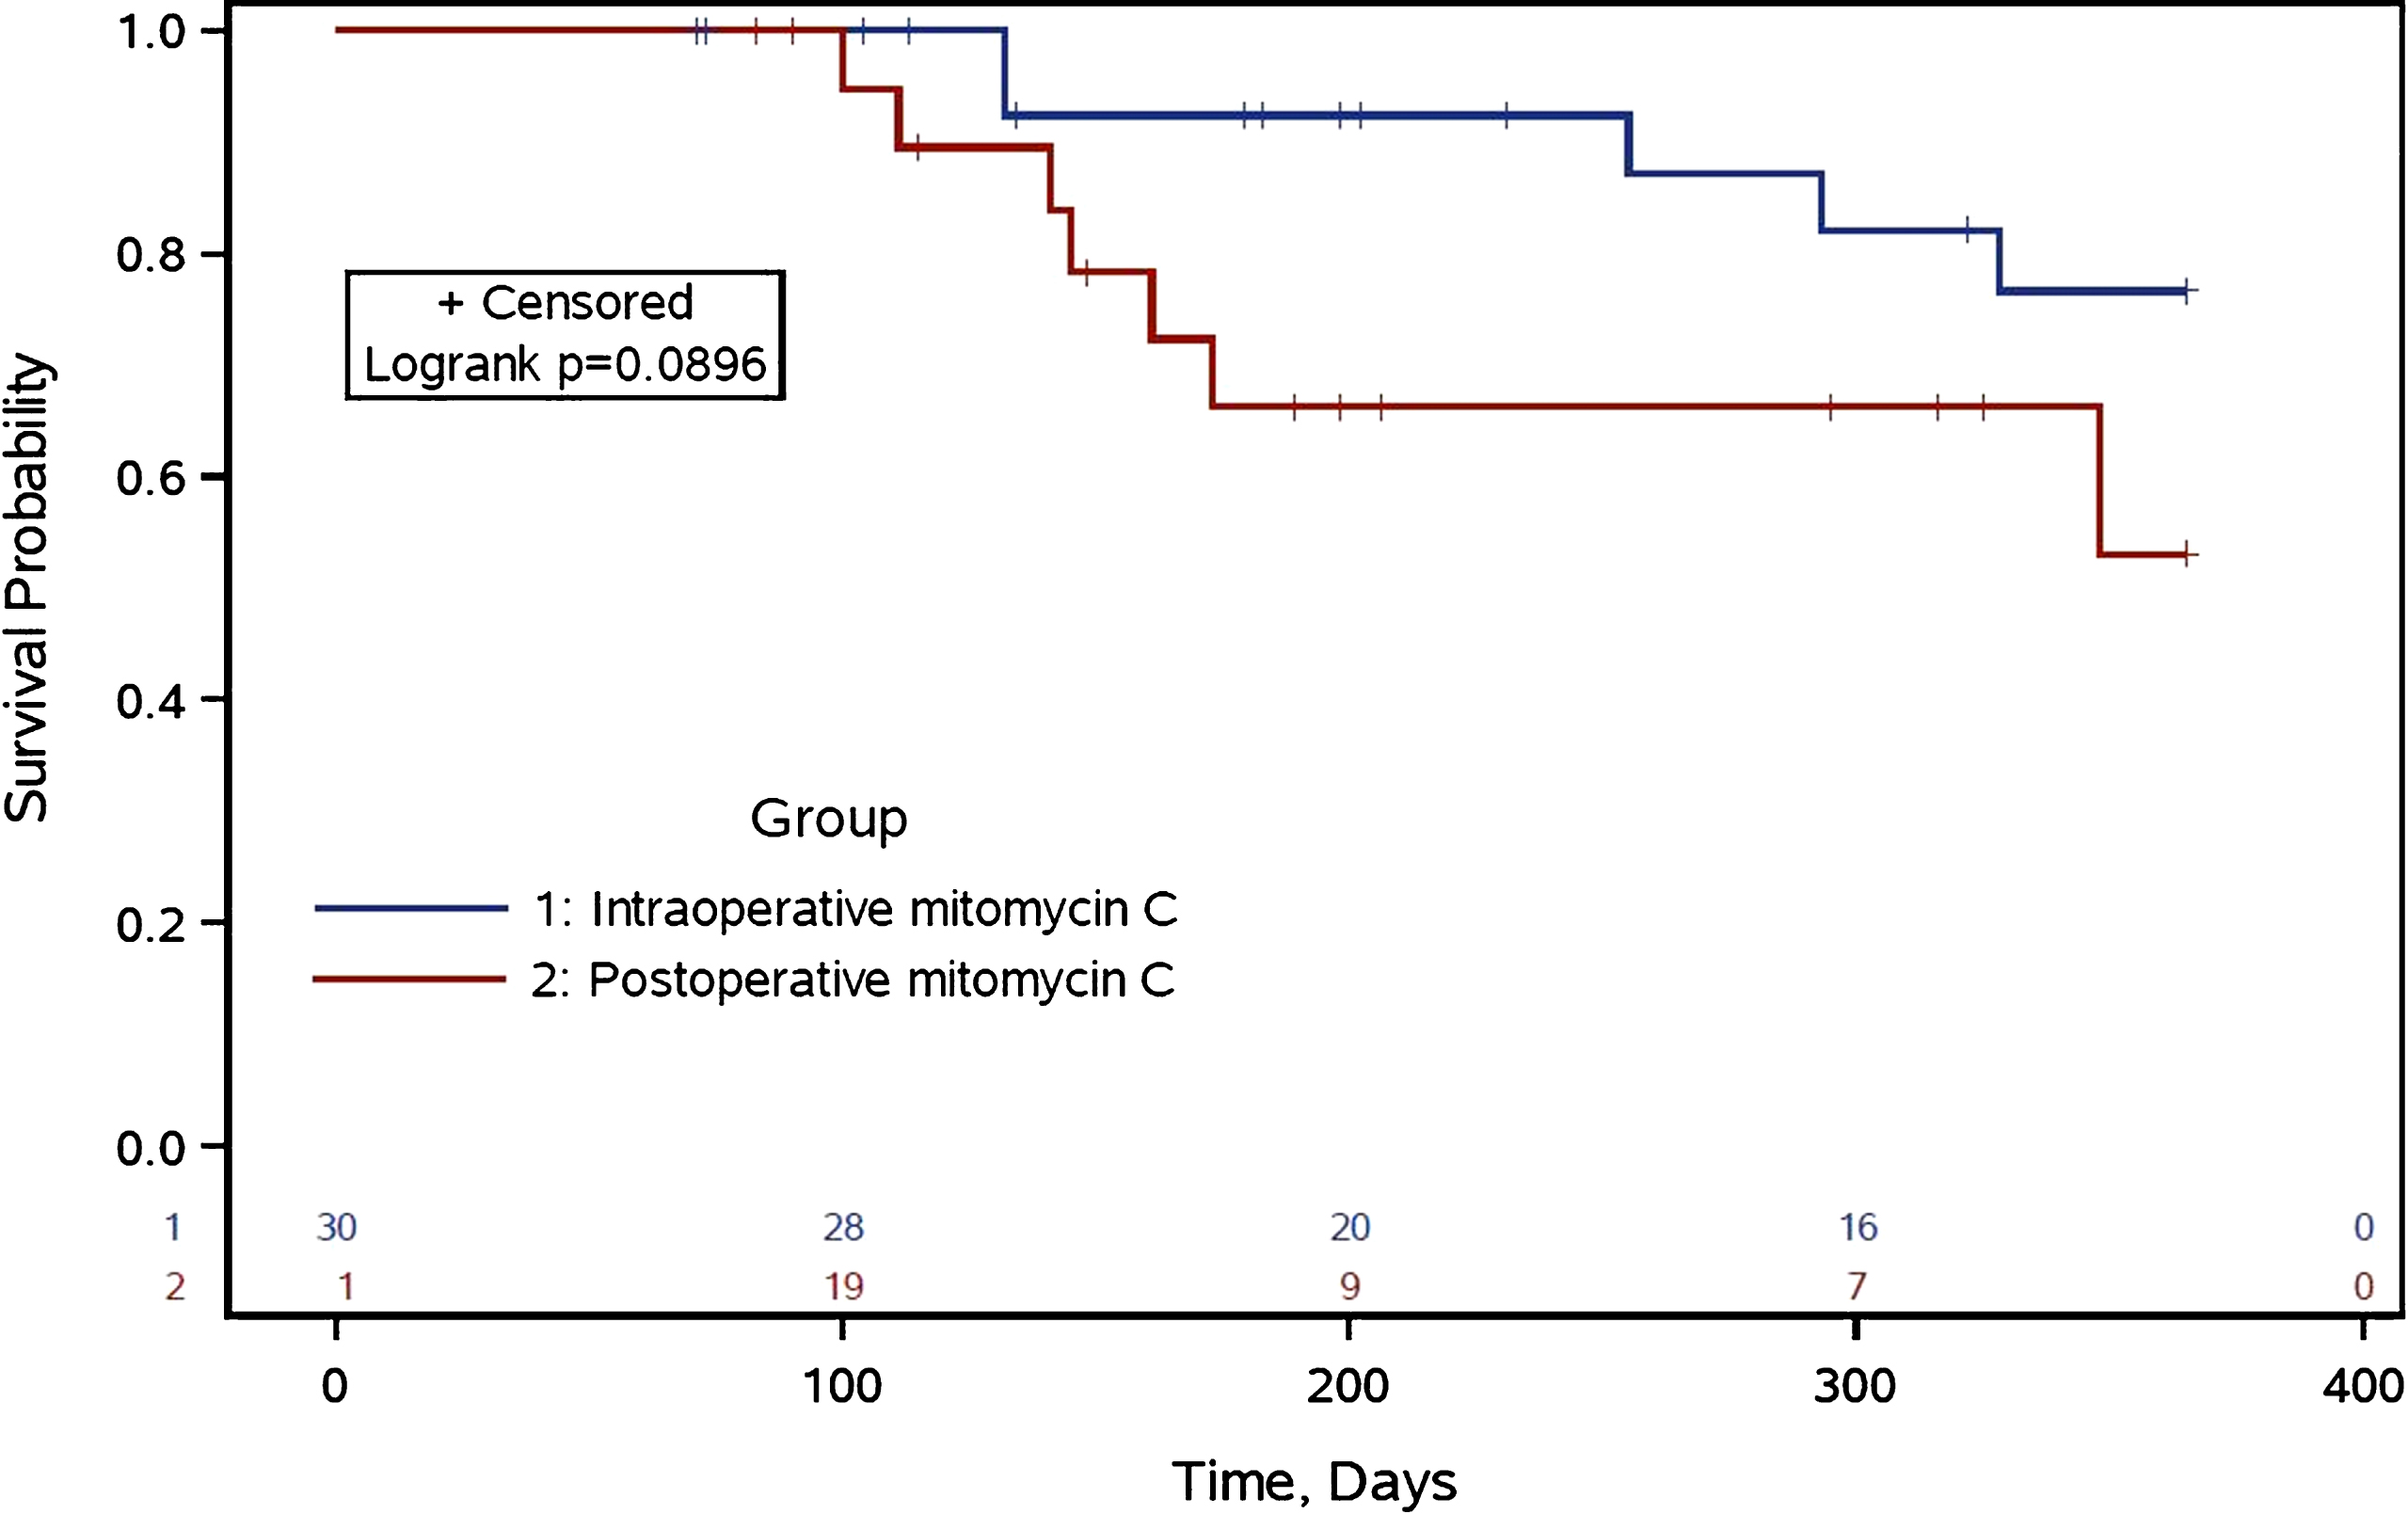 Time to Bladder Tumor Recurrence within the First Year. Kaplan-Meier survival curves for time-to-recurrence of bladder tumors within the first year according to two treatment groups: 1) intraoperative mitomycin C and 2) post-operative day 1 or later mitomycin C.